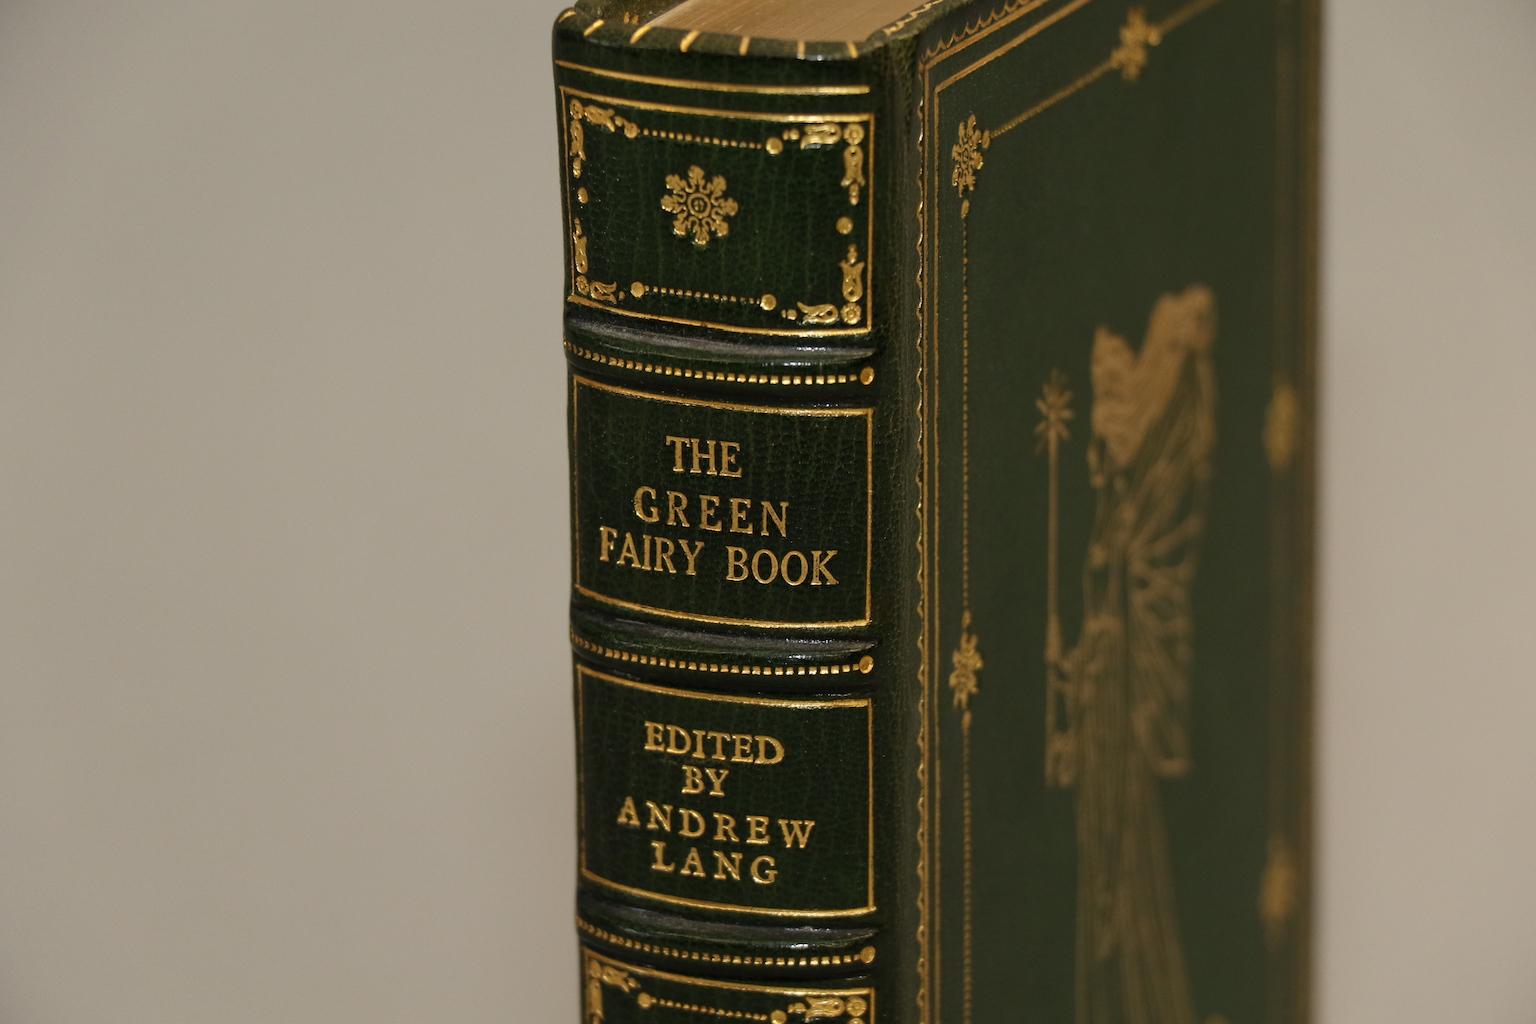 First edition. Leather bound. 1 volume. Bound in full green Morocco by Aspreys with all edges gilt, raised bands, and ornate gilt tooling on covers and spines. Very good. Published in London by Longmans, Green, and Co. in 1892.

Children's